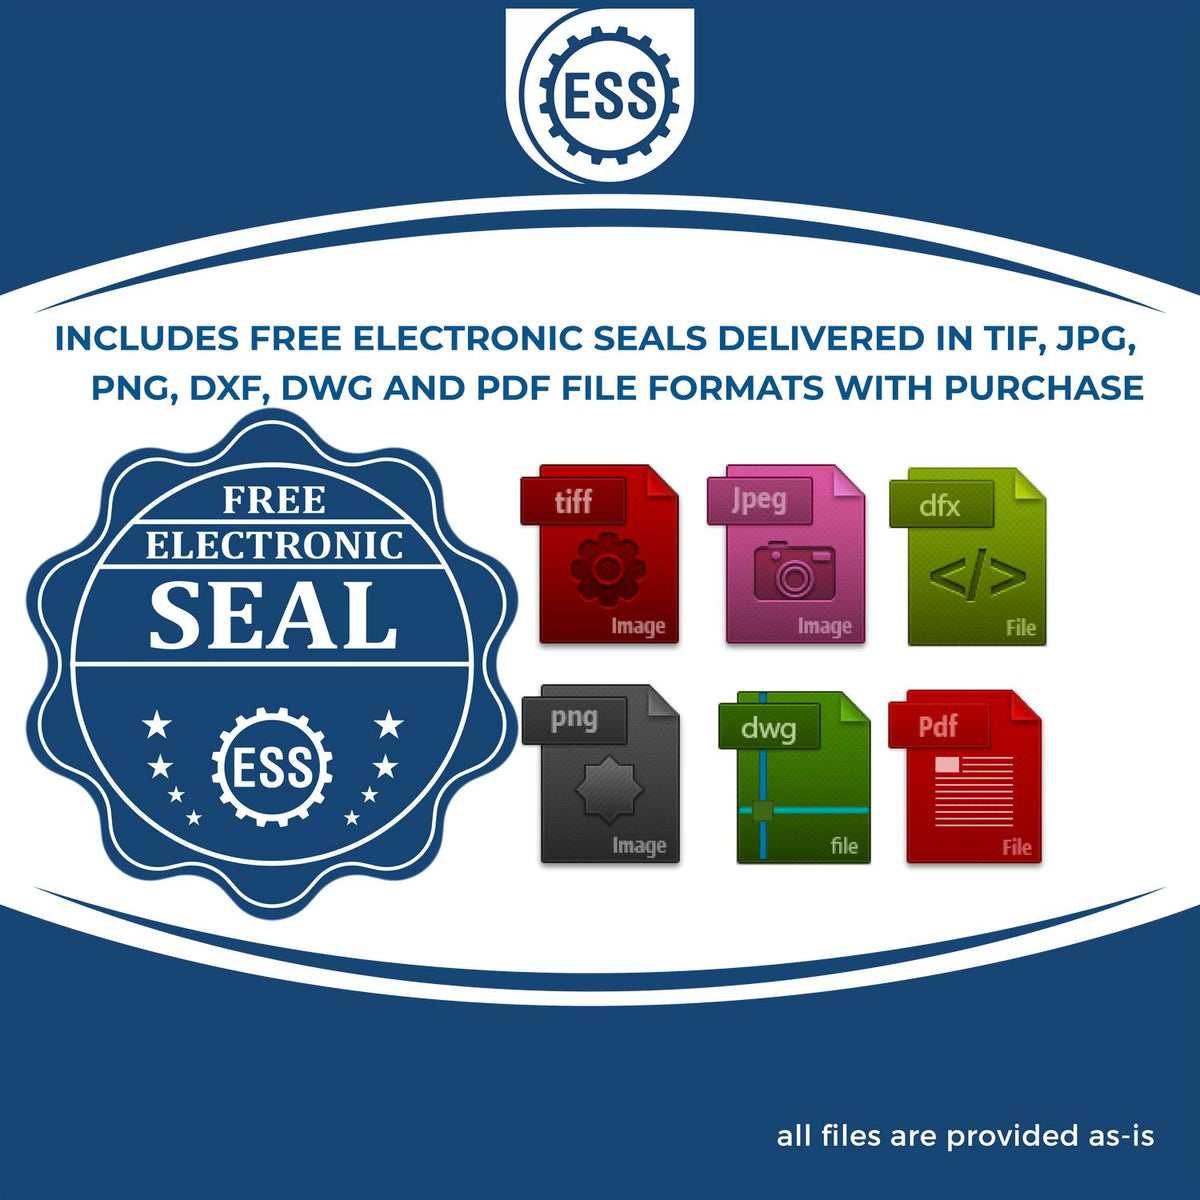 An infographic for the free electronic seal for the State of Virginia Long Reach Architectural Embossing Seal illustrating the different file type icons such as DXF, DWG, TIF, JPG and PNG.